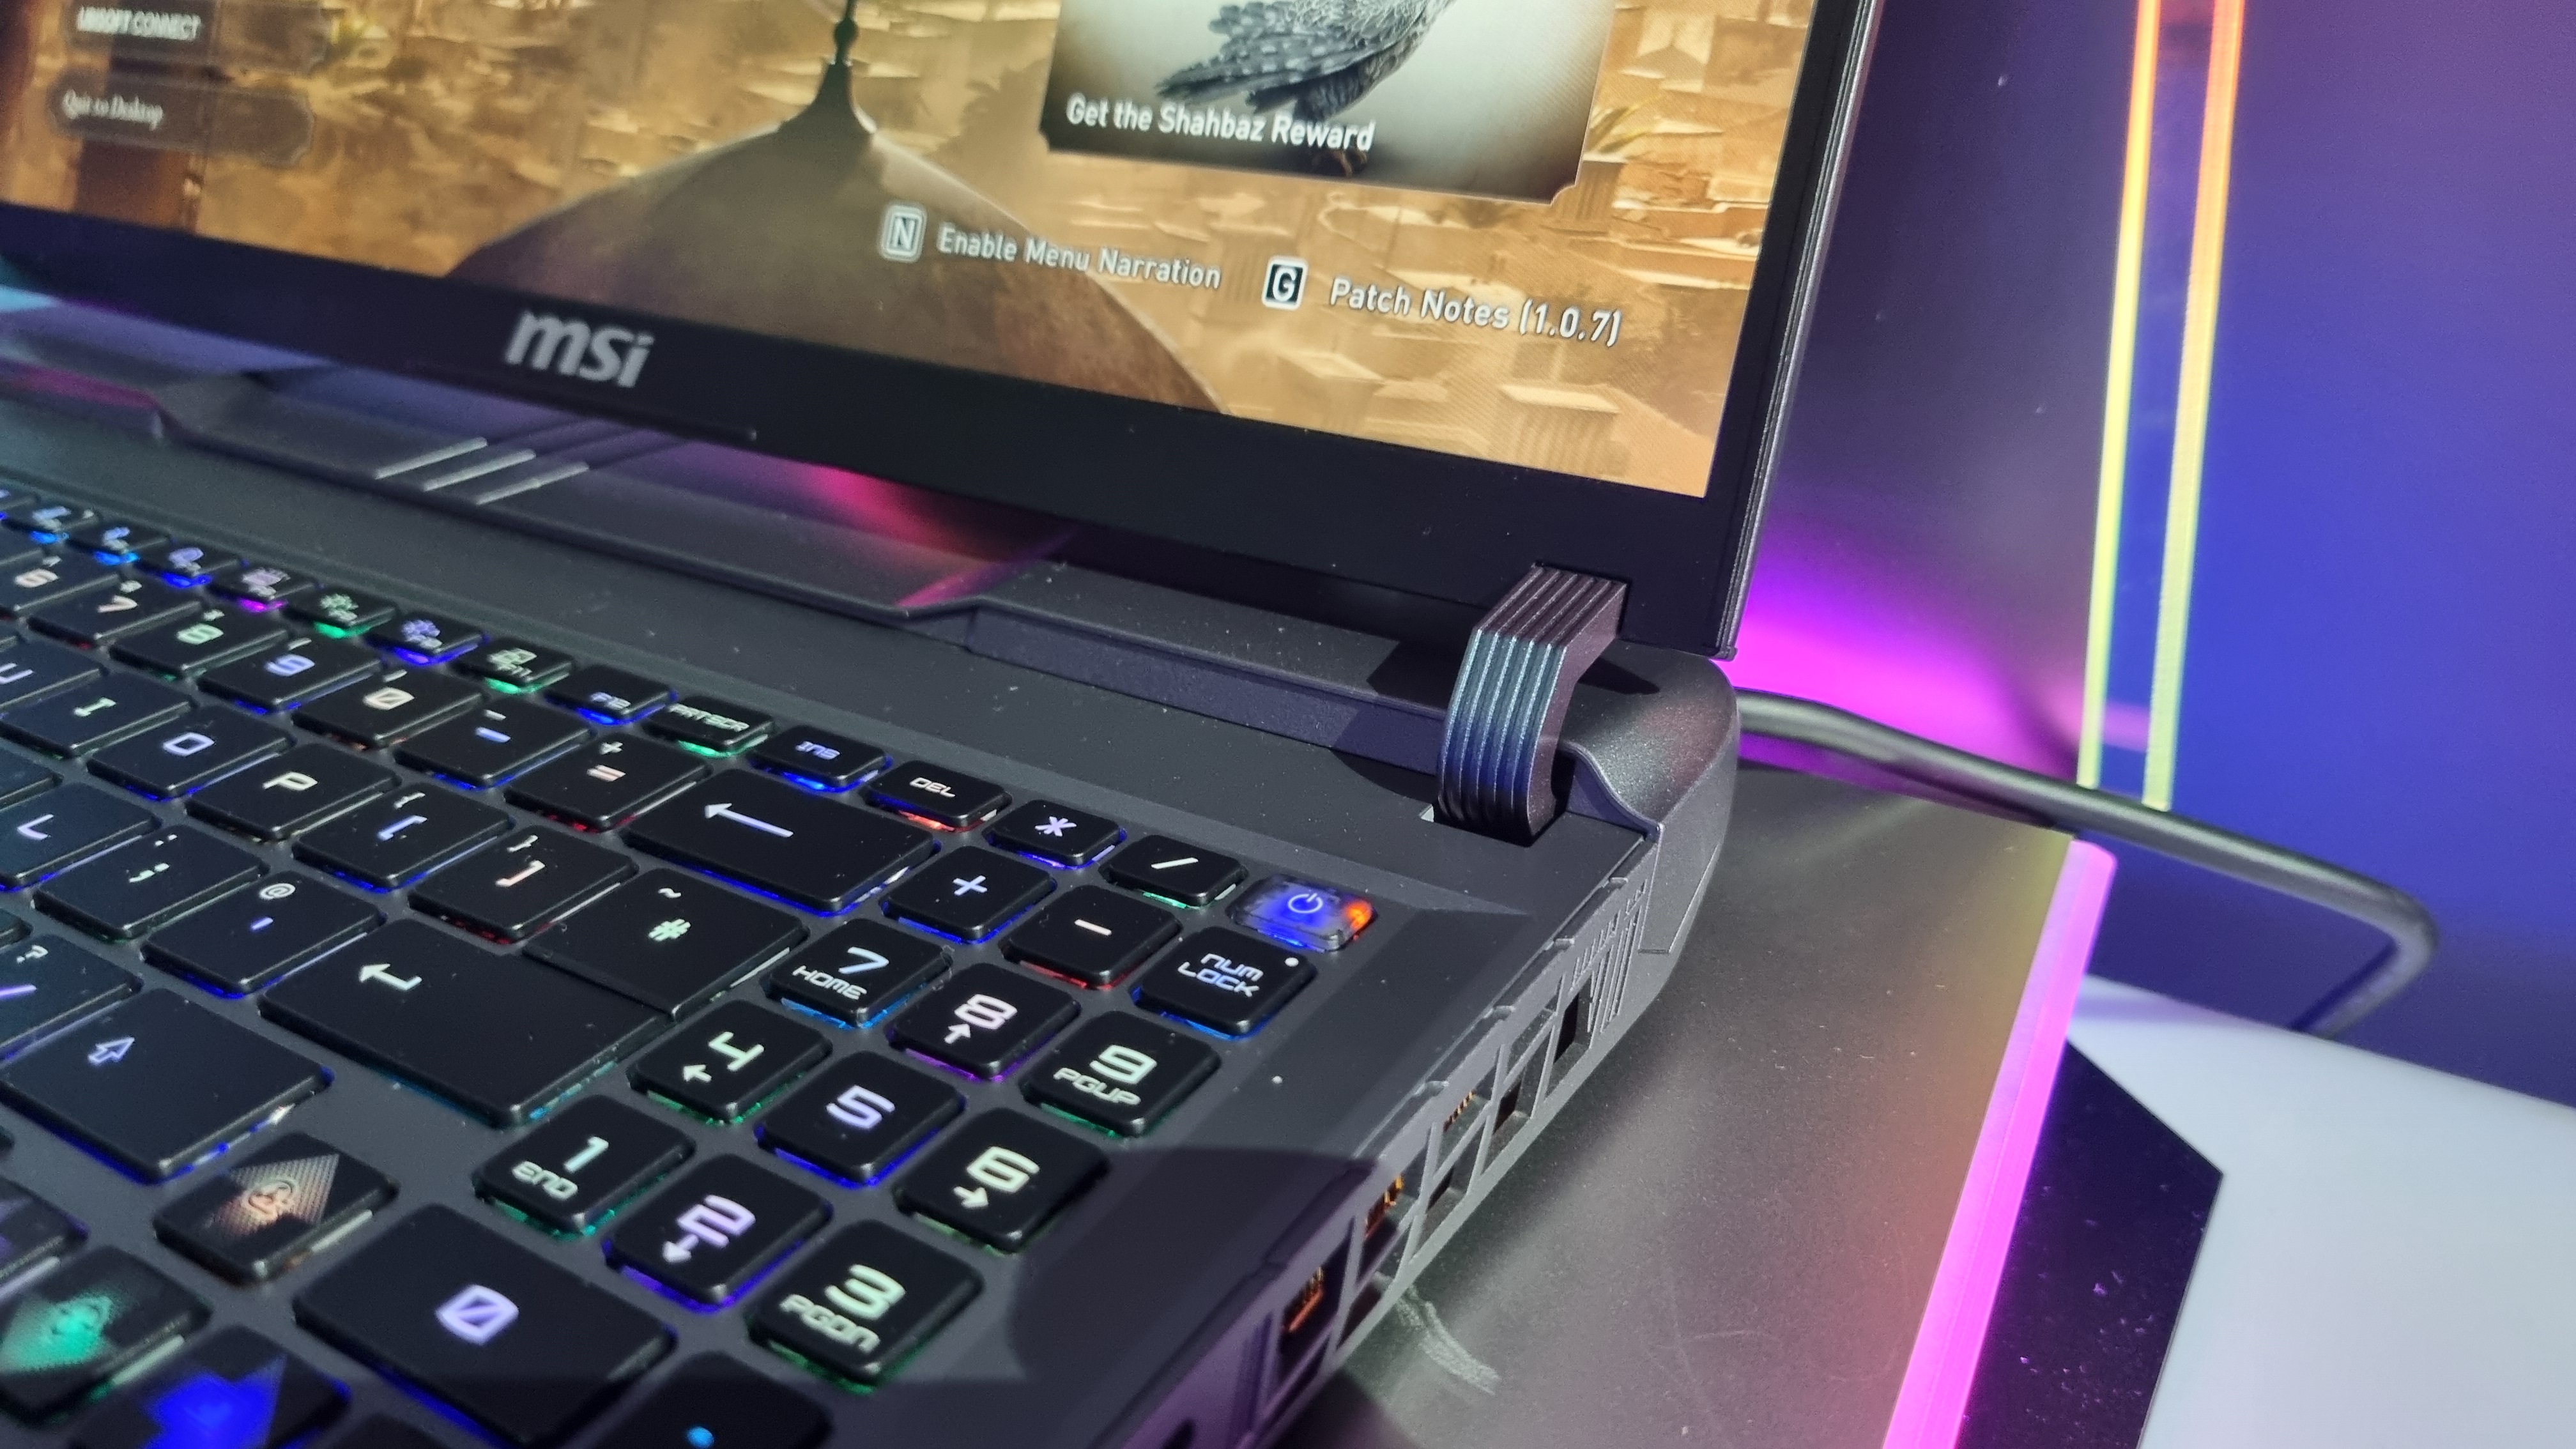 The hinge on the MSI Sword 16 gaming laptop